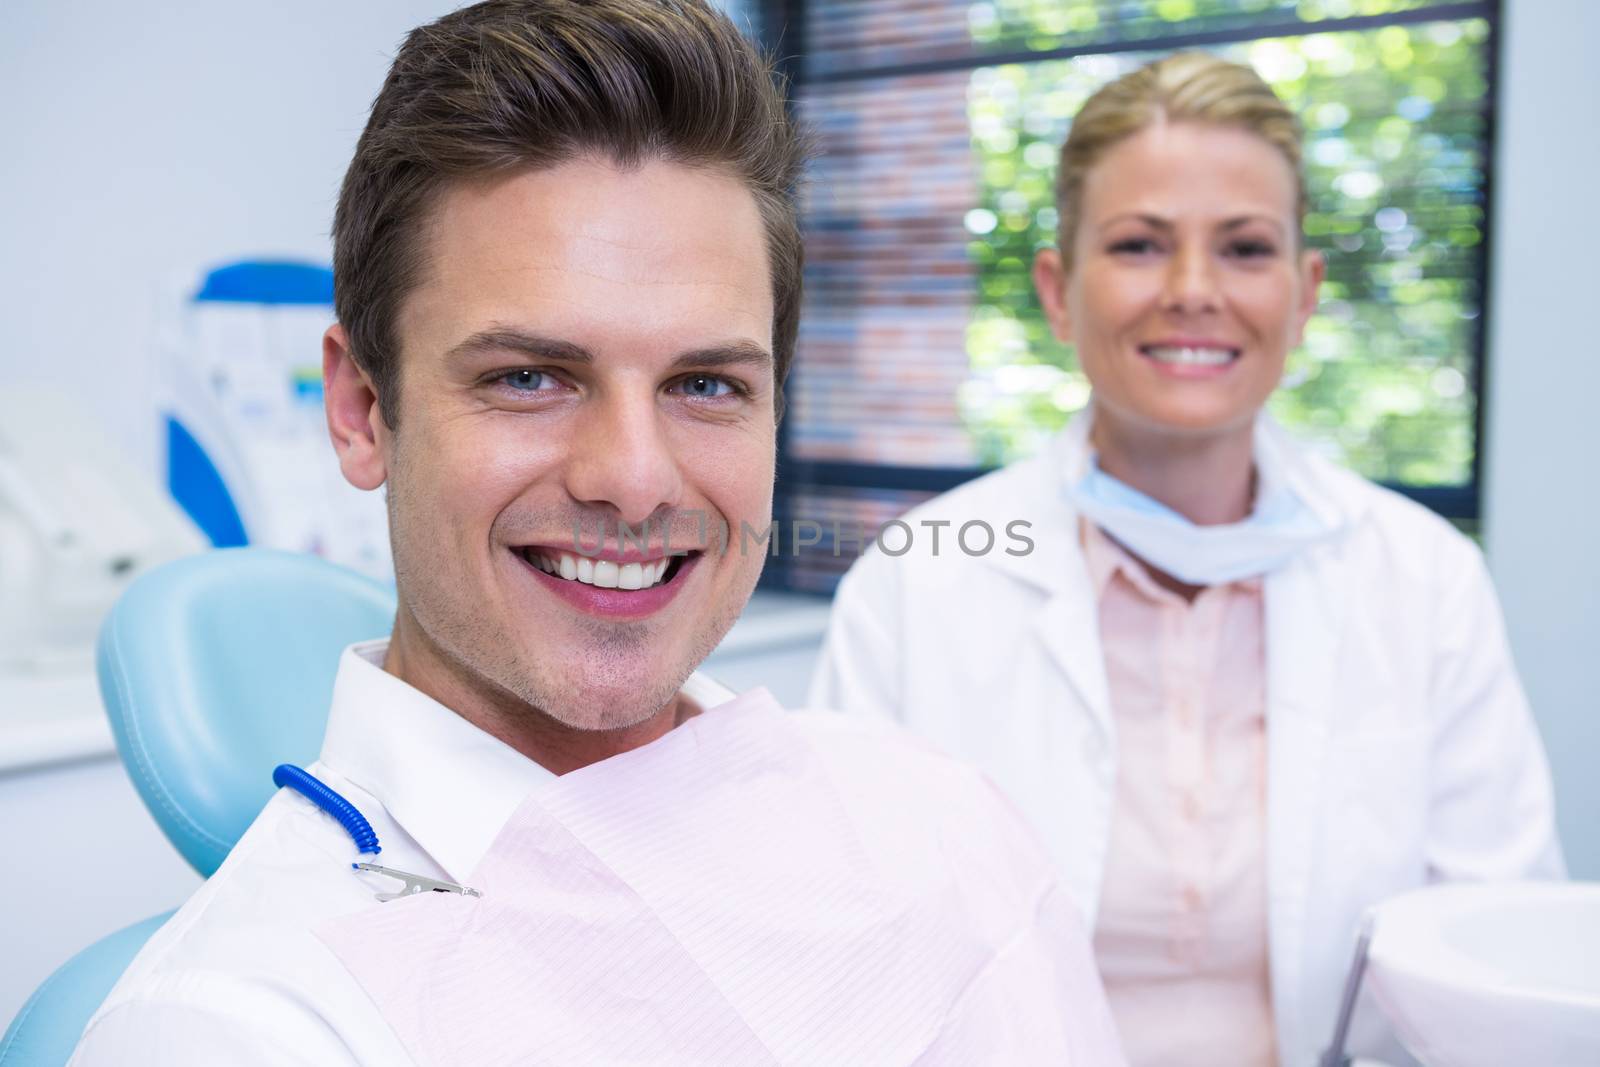 Portrait of smiling man and dentist sitting at dental clinic